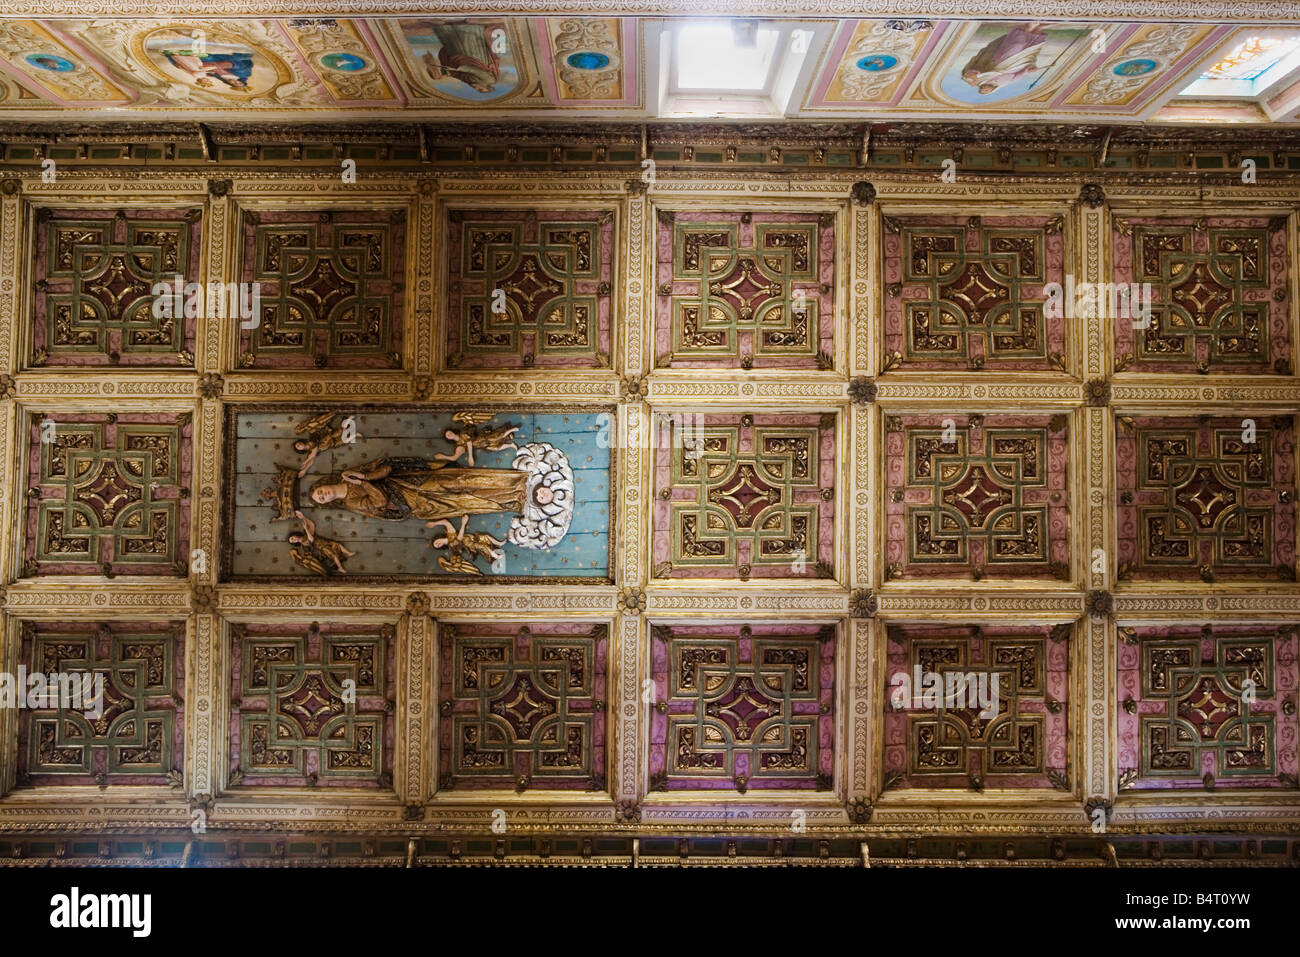 Wooden ceiling over broad aisle  Cathedral (XI)  Rossano  Calabria  Italy Stock Photo